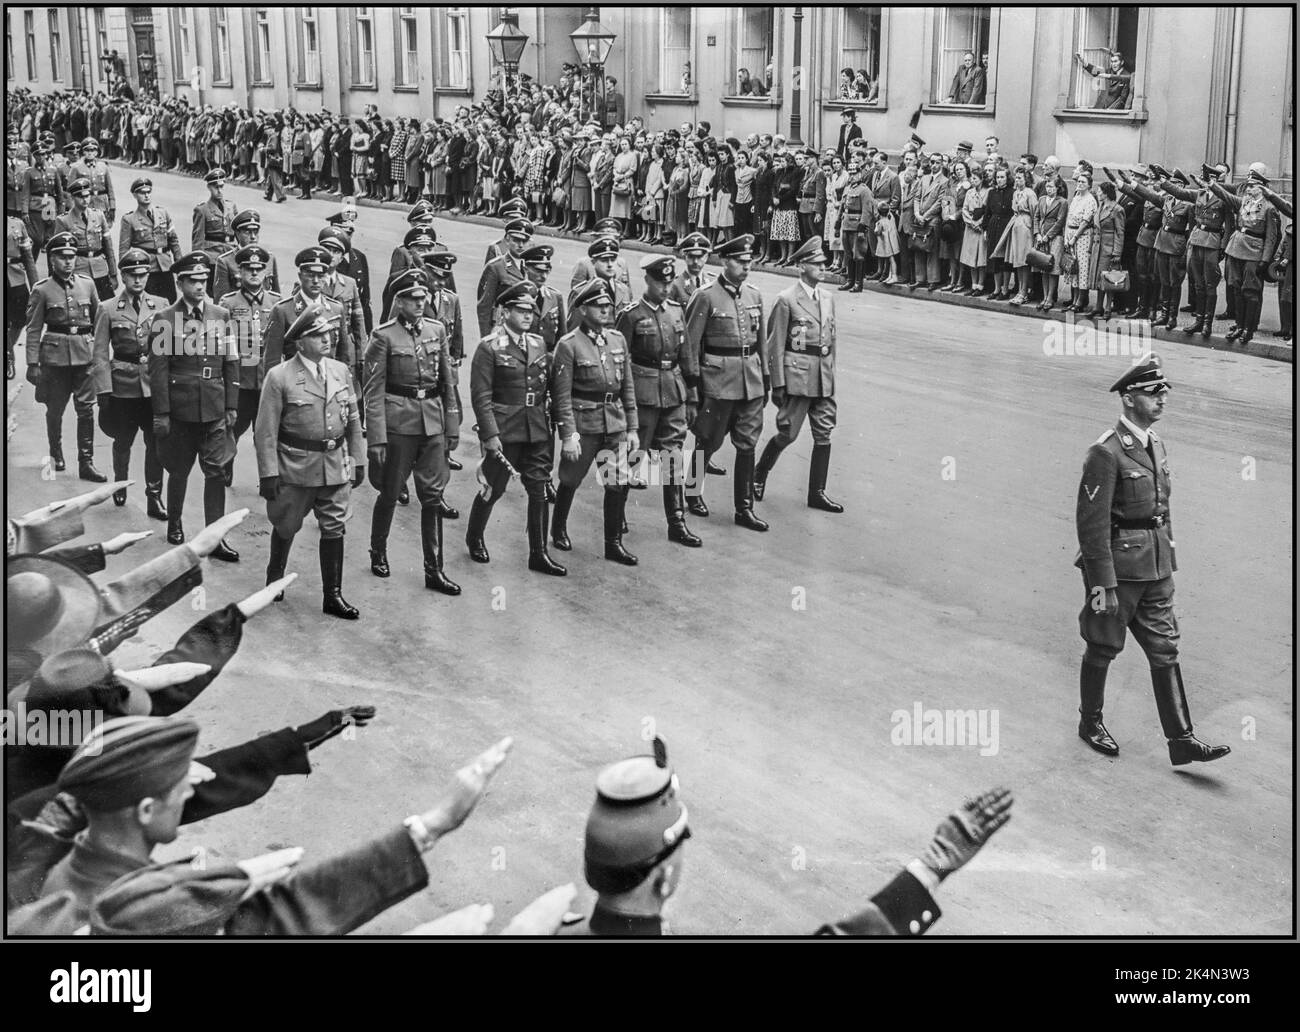 HIMMLER HEYDRICH leading funeral of Reinhard Heydrich, Deputy Reich Protector of Bohemia and Moravia Prague. Reichsfuhrer SS Heinrich Himmler at the head of the funeral procession [09.06.1942] Heinrich Himmler walking in front of high ranking Nazi military officers at the state funeral for Reinhard Heydrich, 1942 Berlin Nazi Germany Stock Photo